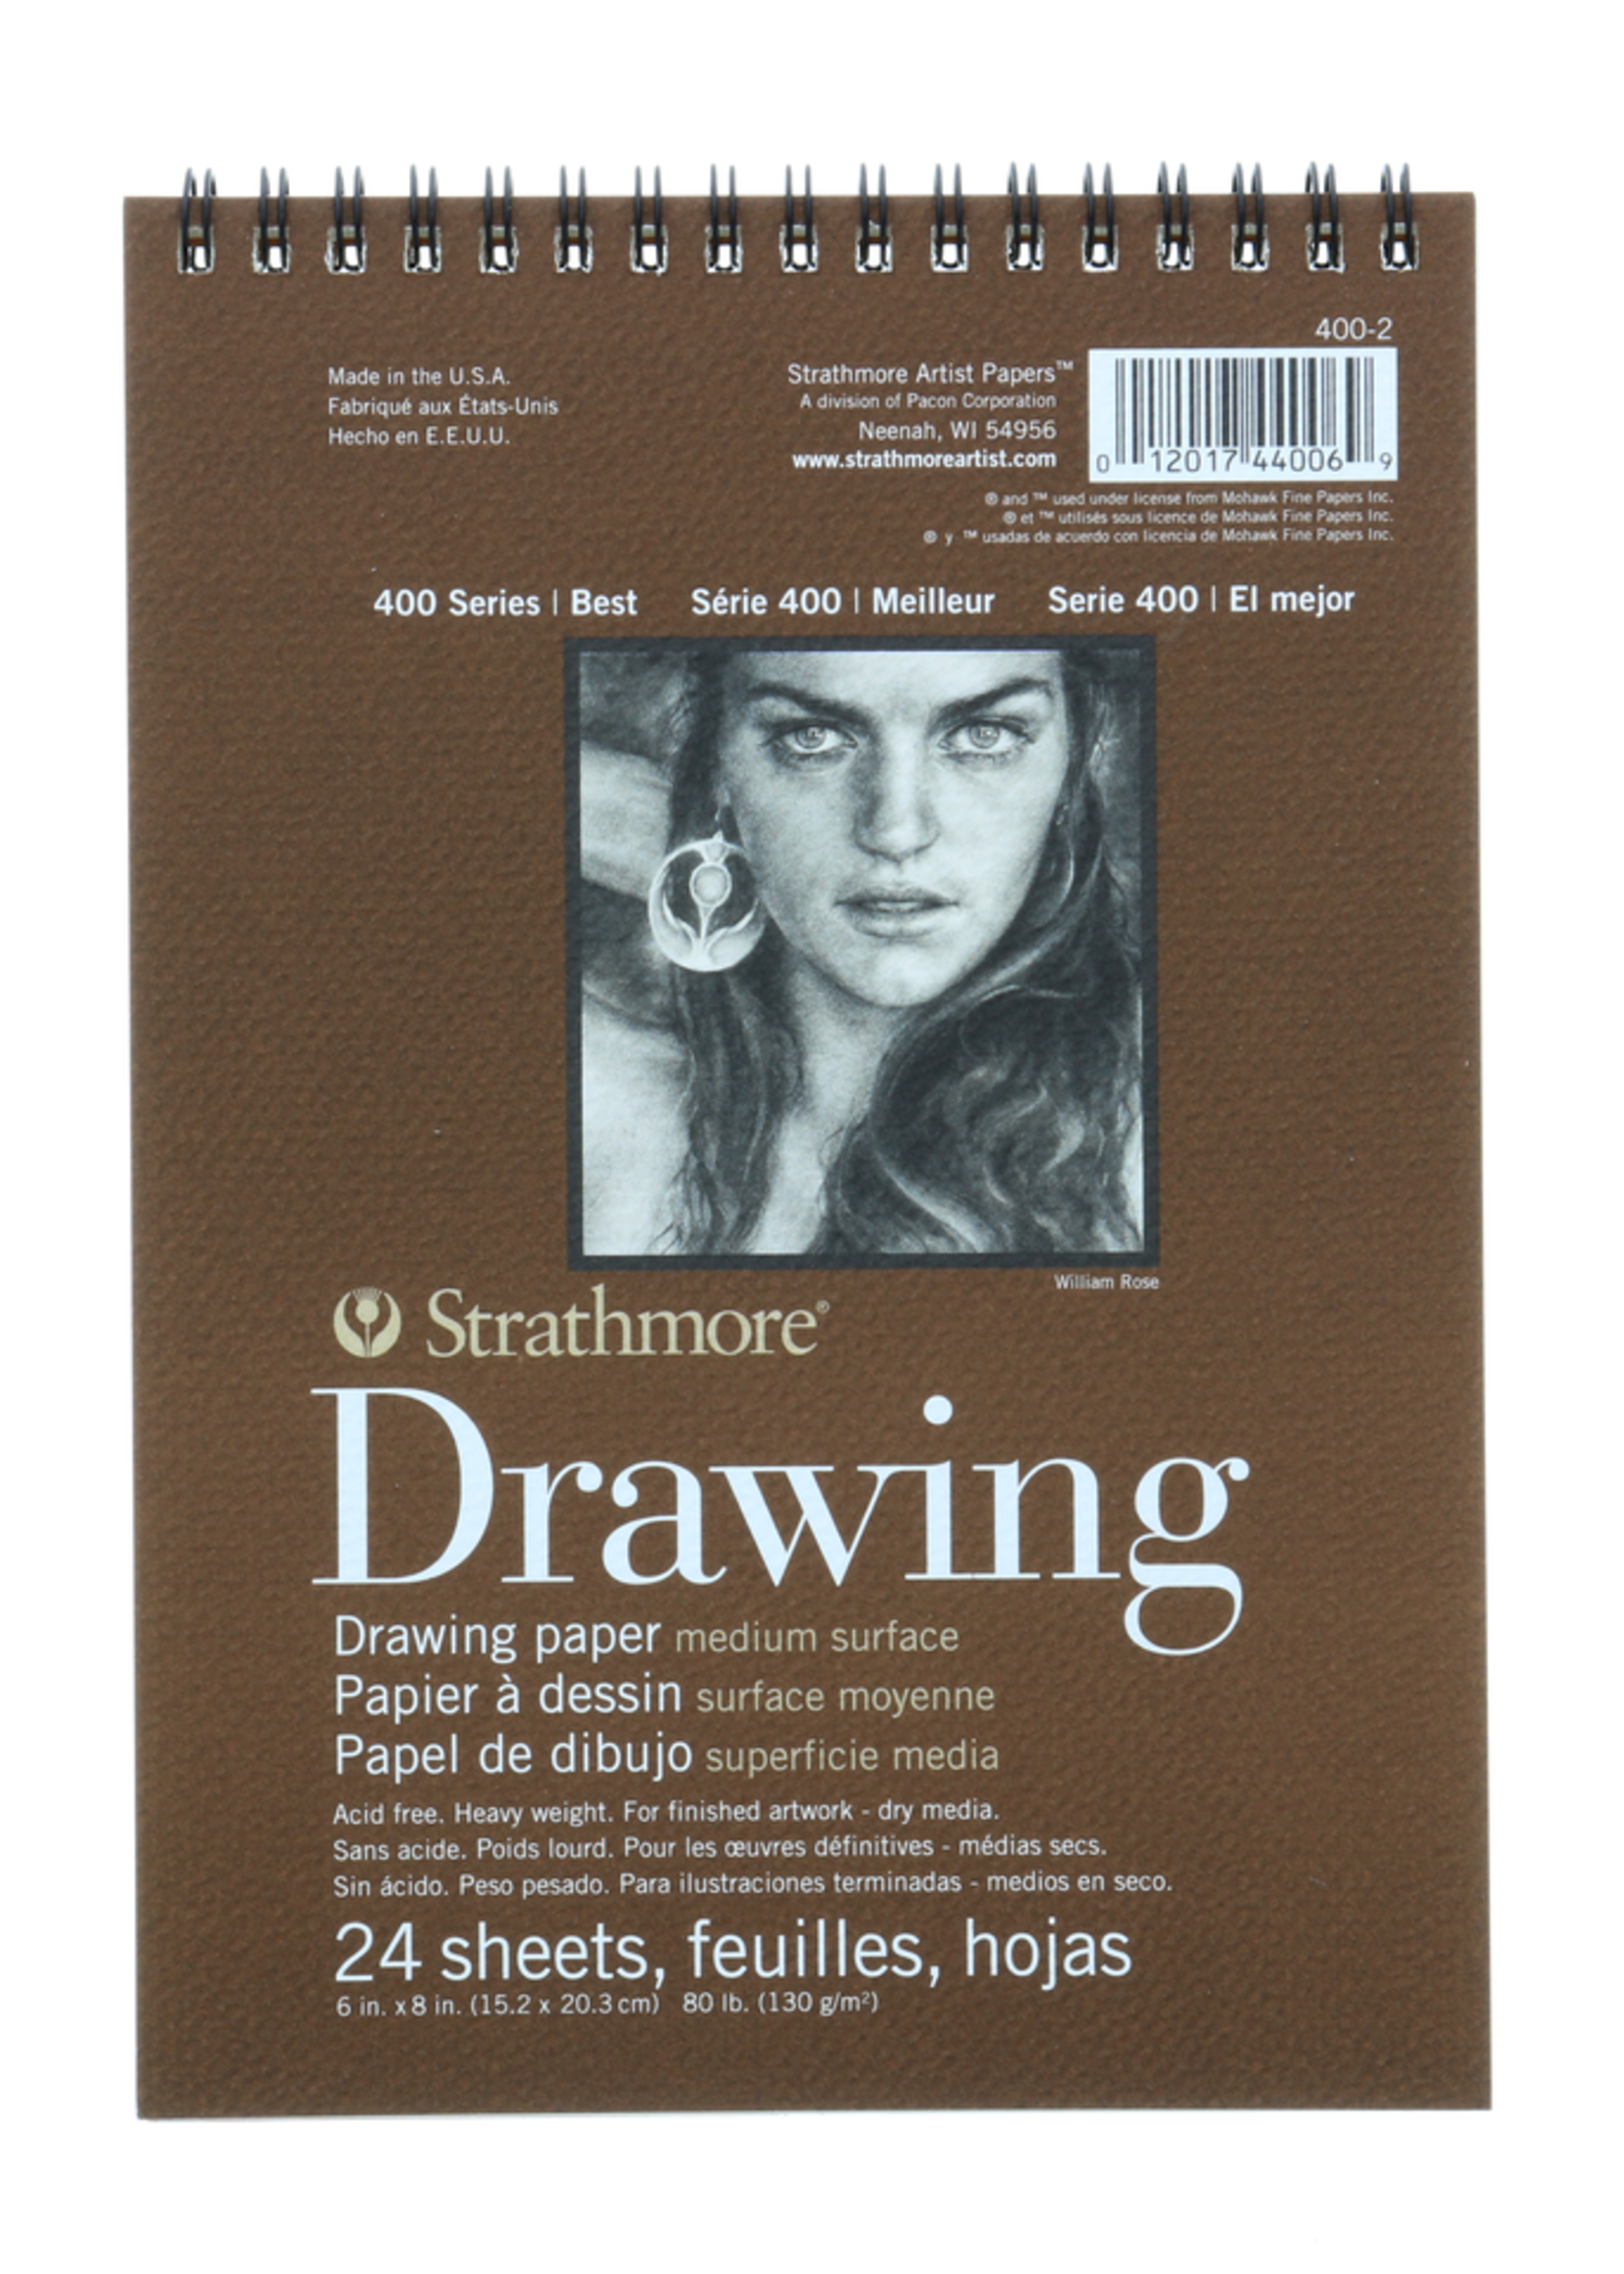 PACON/STRATHMORE DRAWING PAD 24 SHEETS